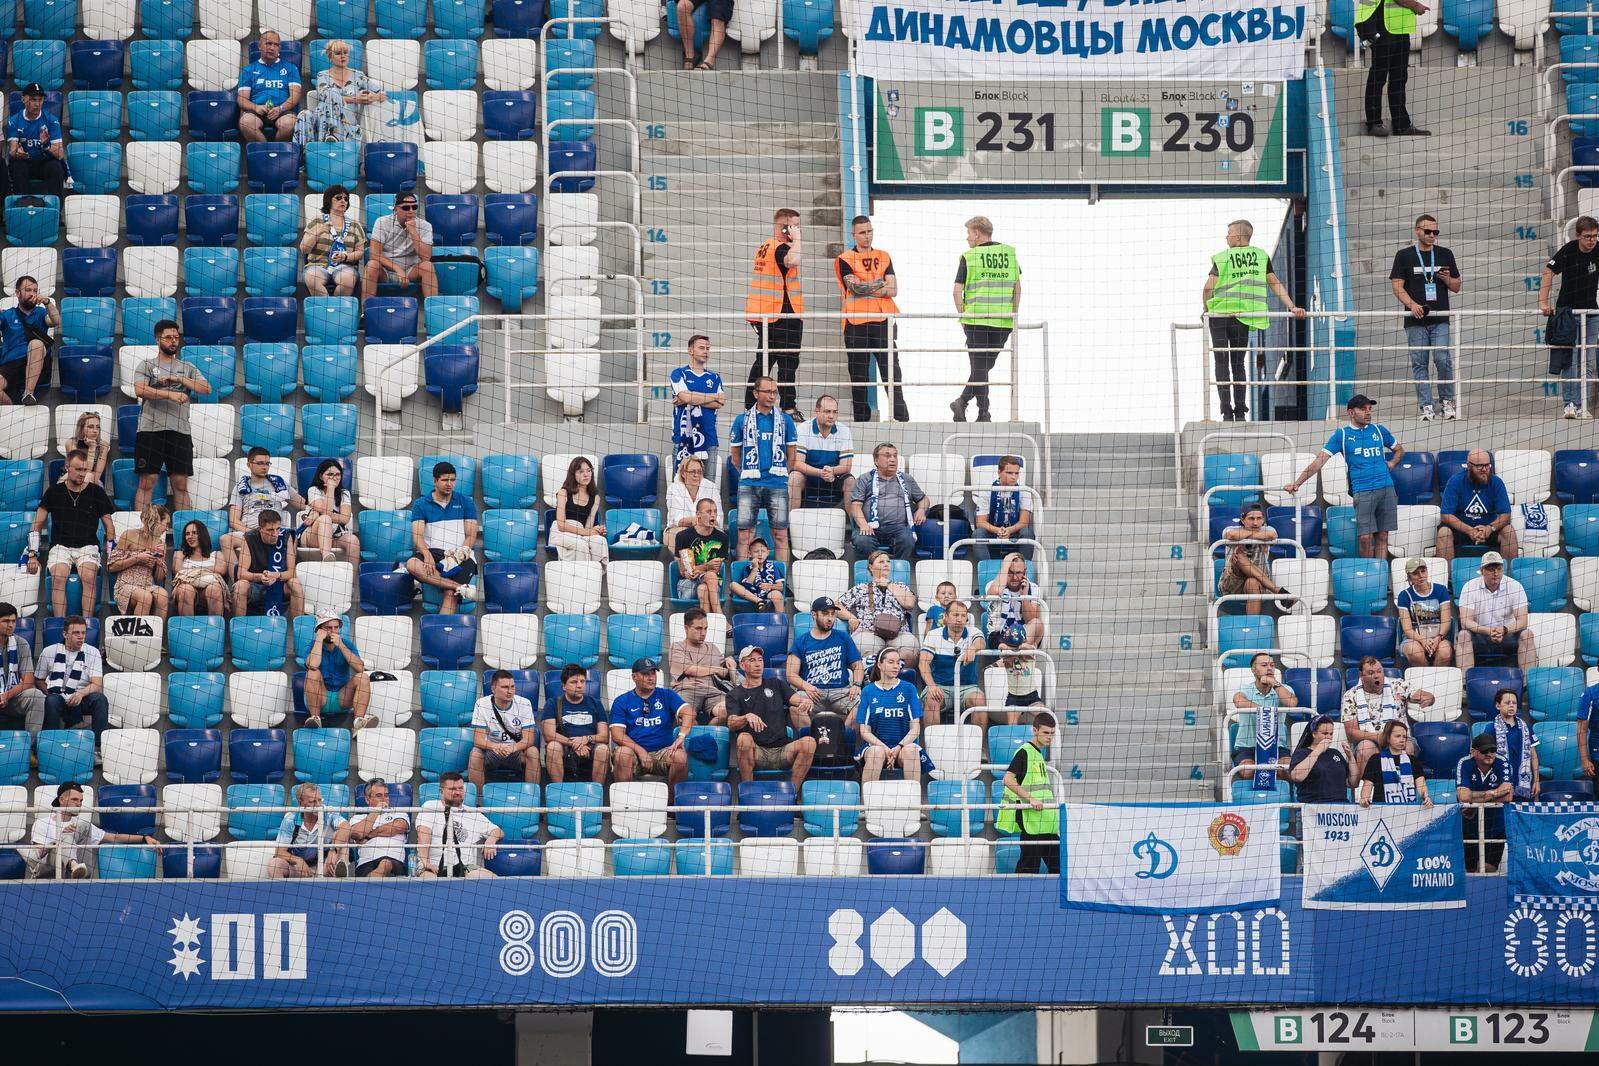 FC Dynamo Moscow News | Information for fans planning to support the team in Nizhny Novgorod. The official Dynamo club website.